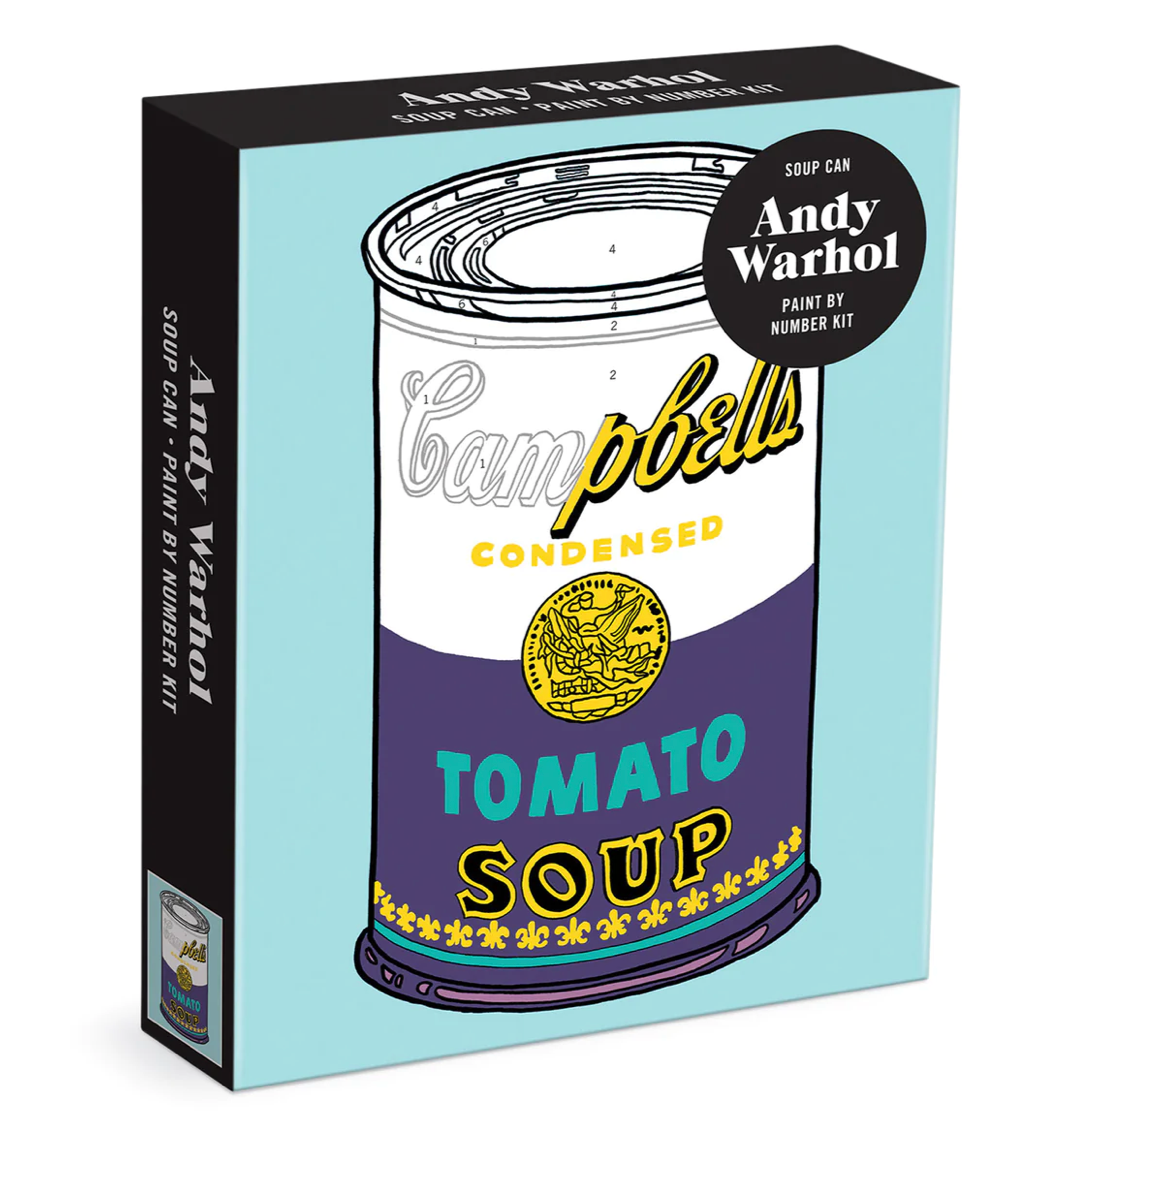 Andy Warhol: Paint by Number Soup Can